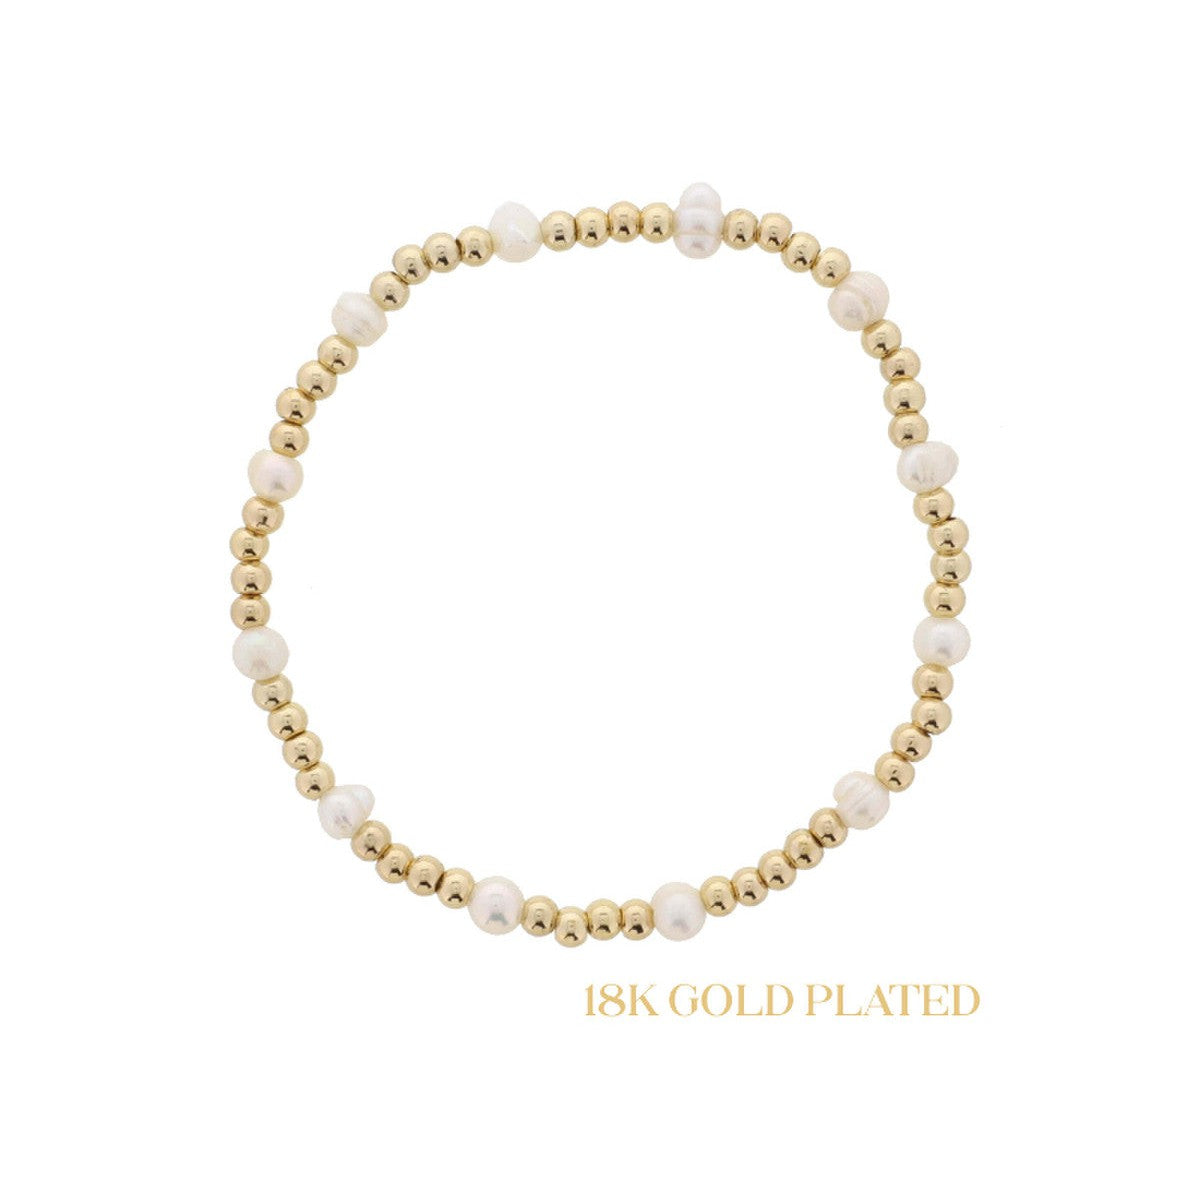 Small Gold Ball Beaded Bracelet W/ Pearls